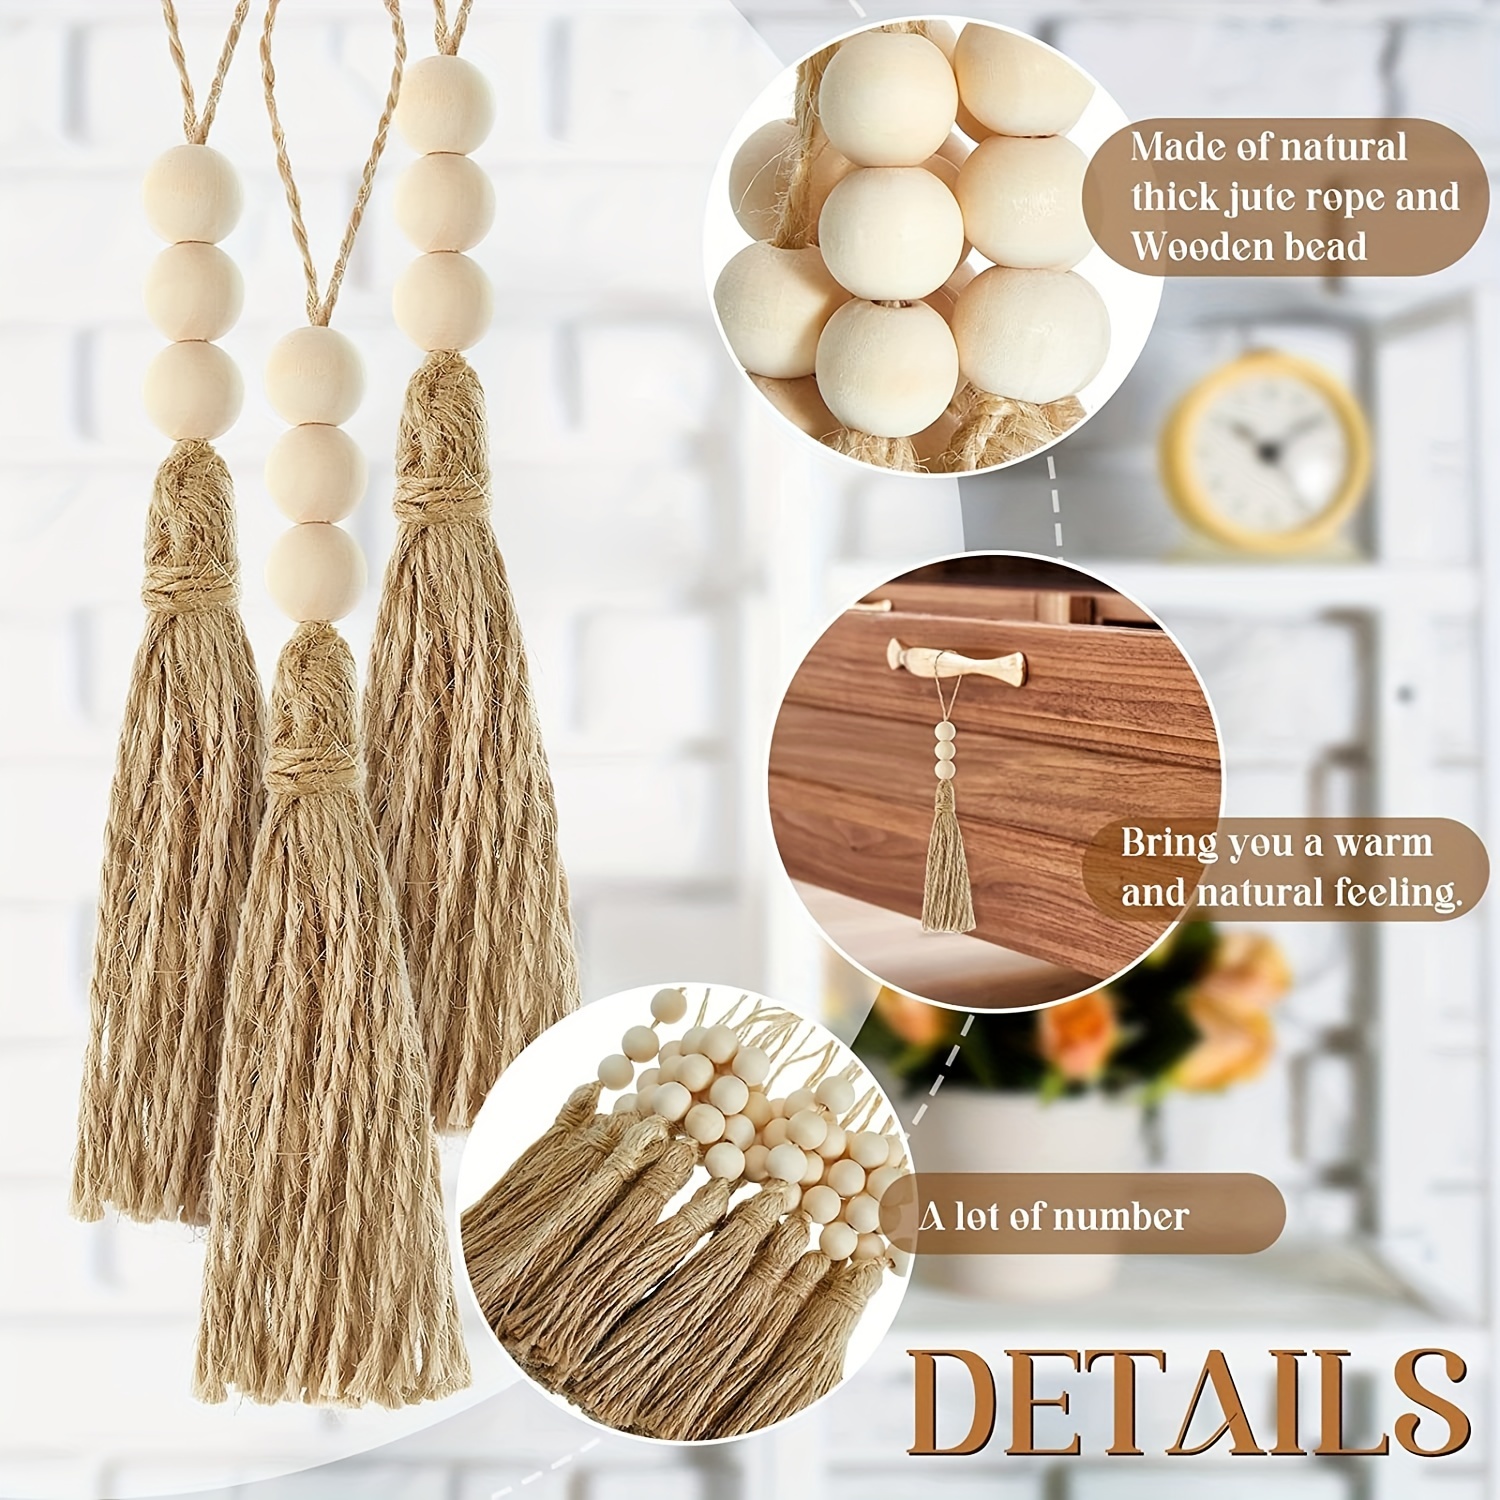 Wood Beads Garland Decorative Beads Wooden Beads Color Gold and